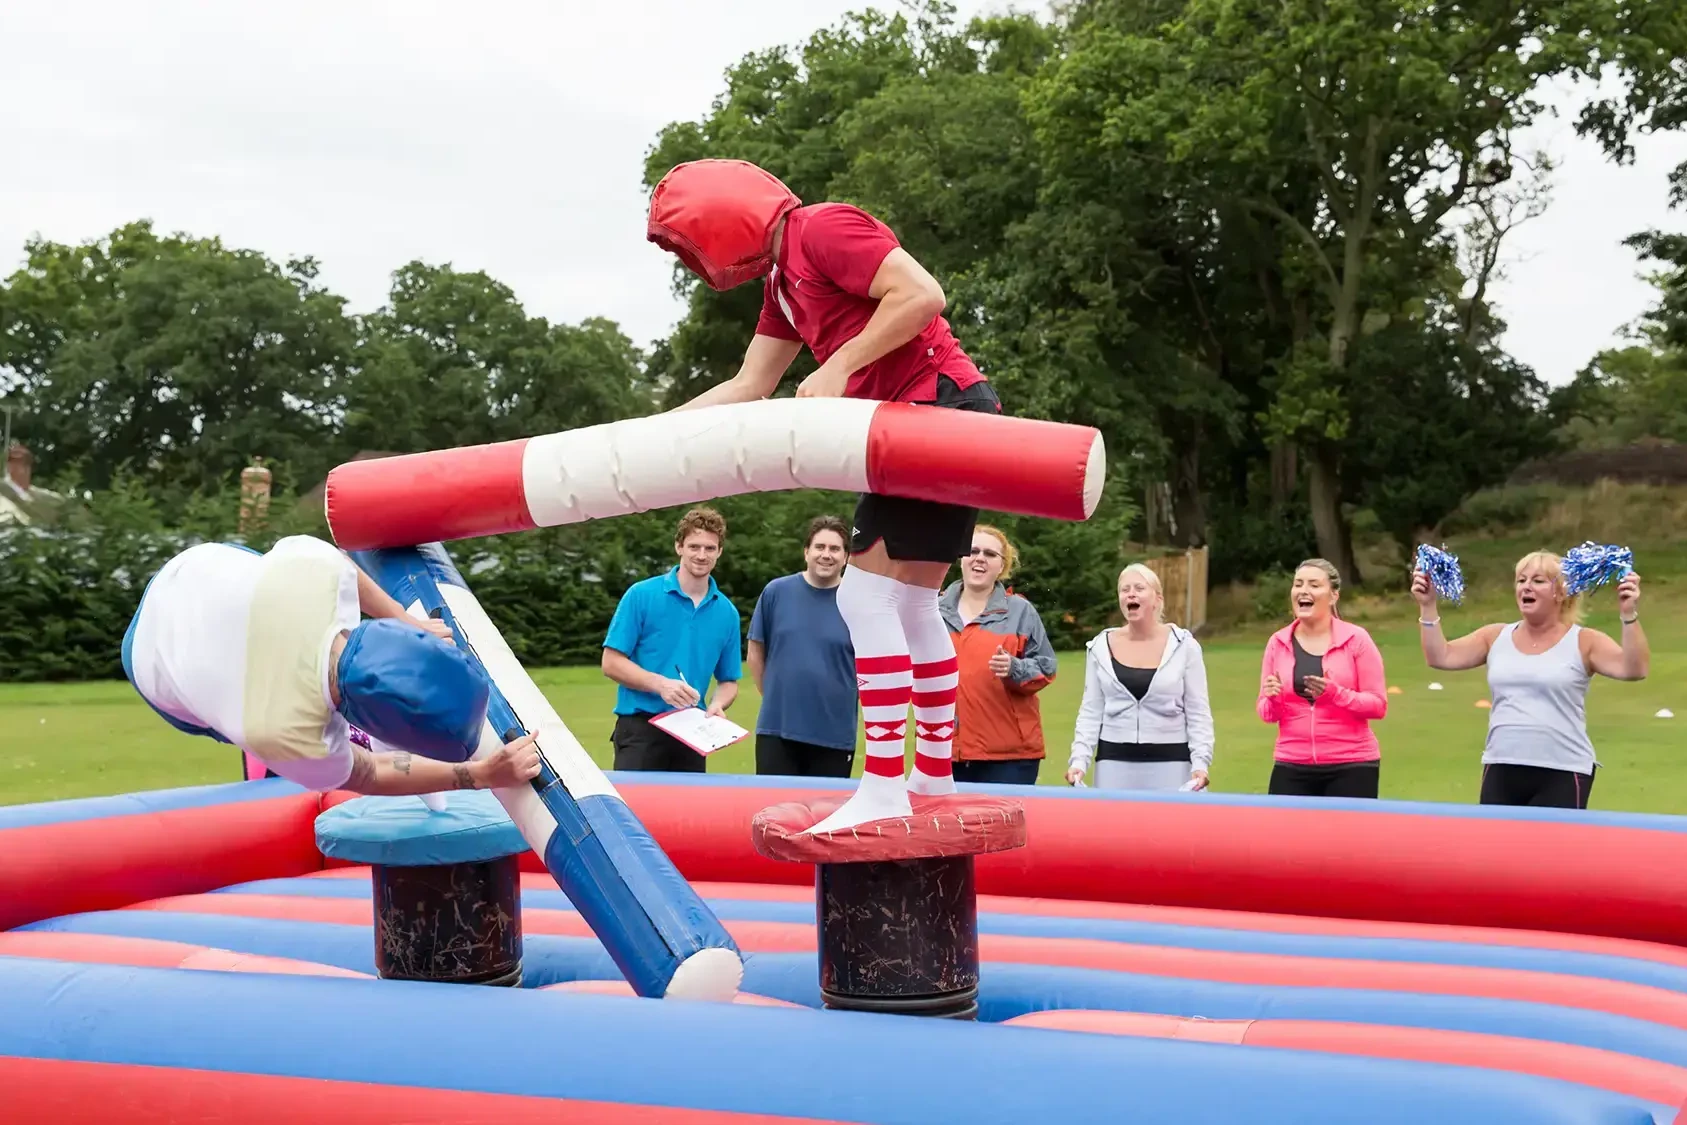 gladiators on inflatable arena fighting with corlourful pugil sticks in team building event